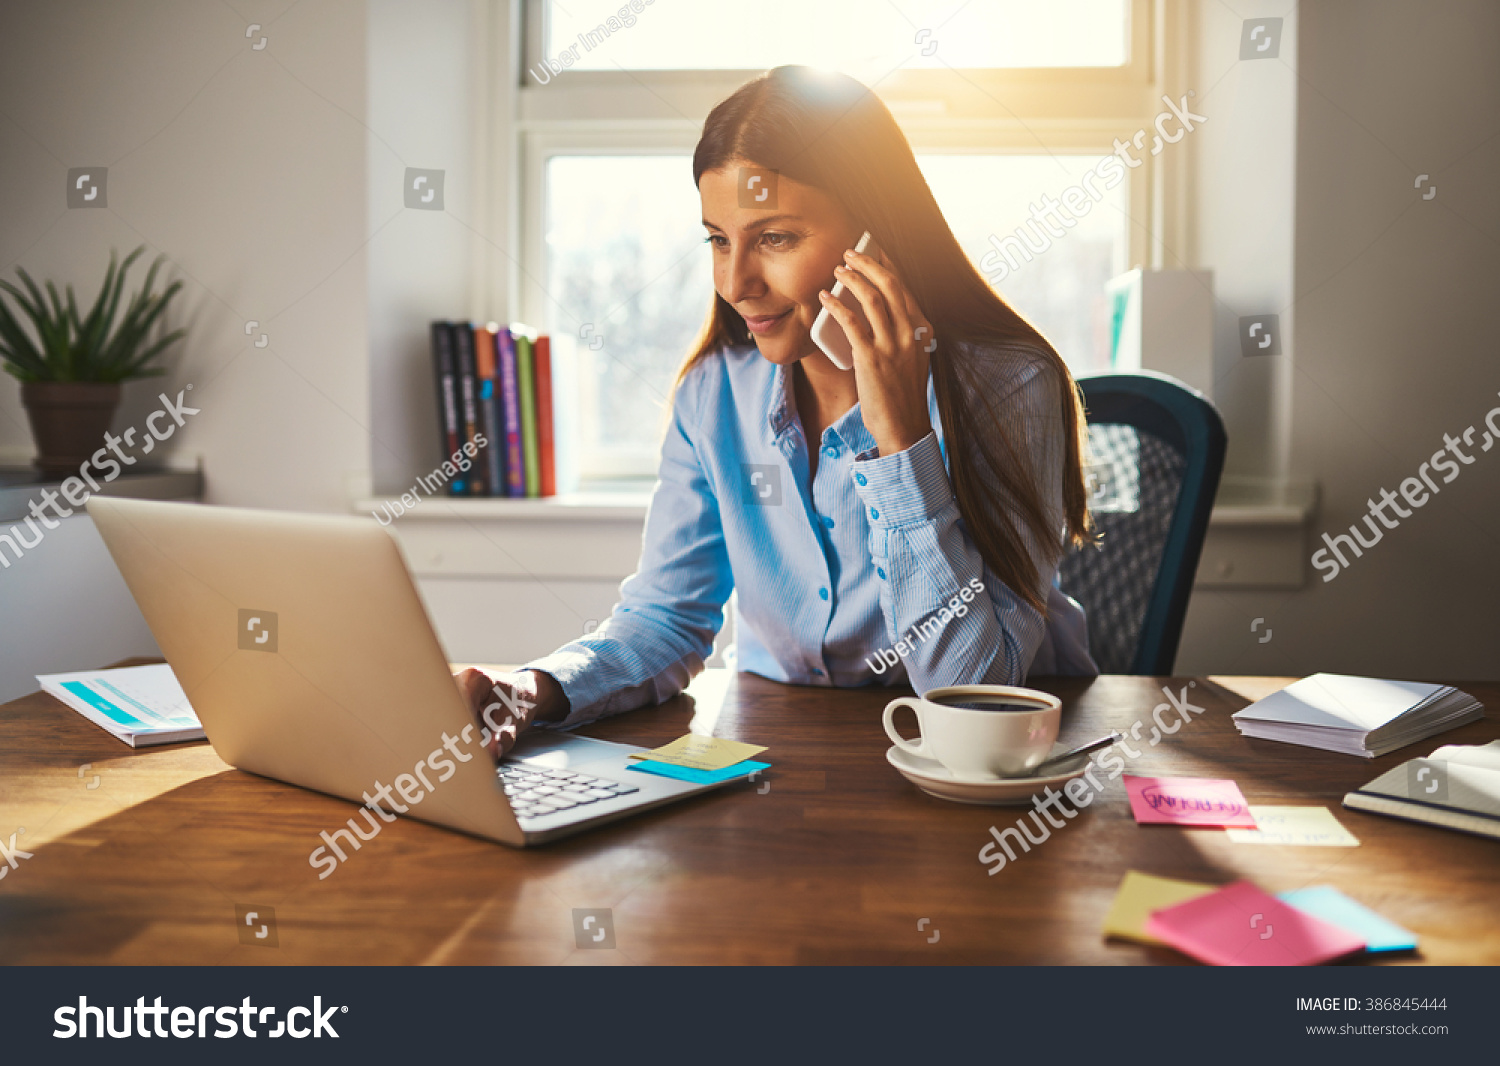 Woman working on laptop at office while talking on phone, backlit warm light #386845444